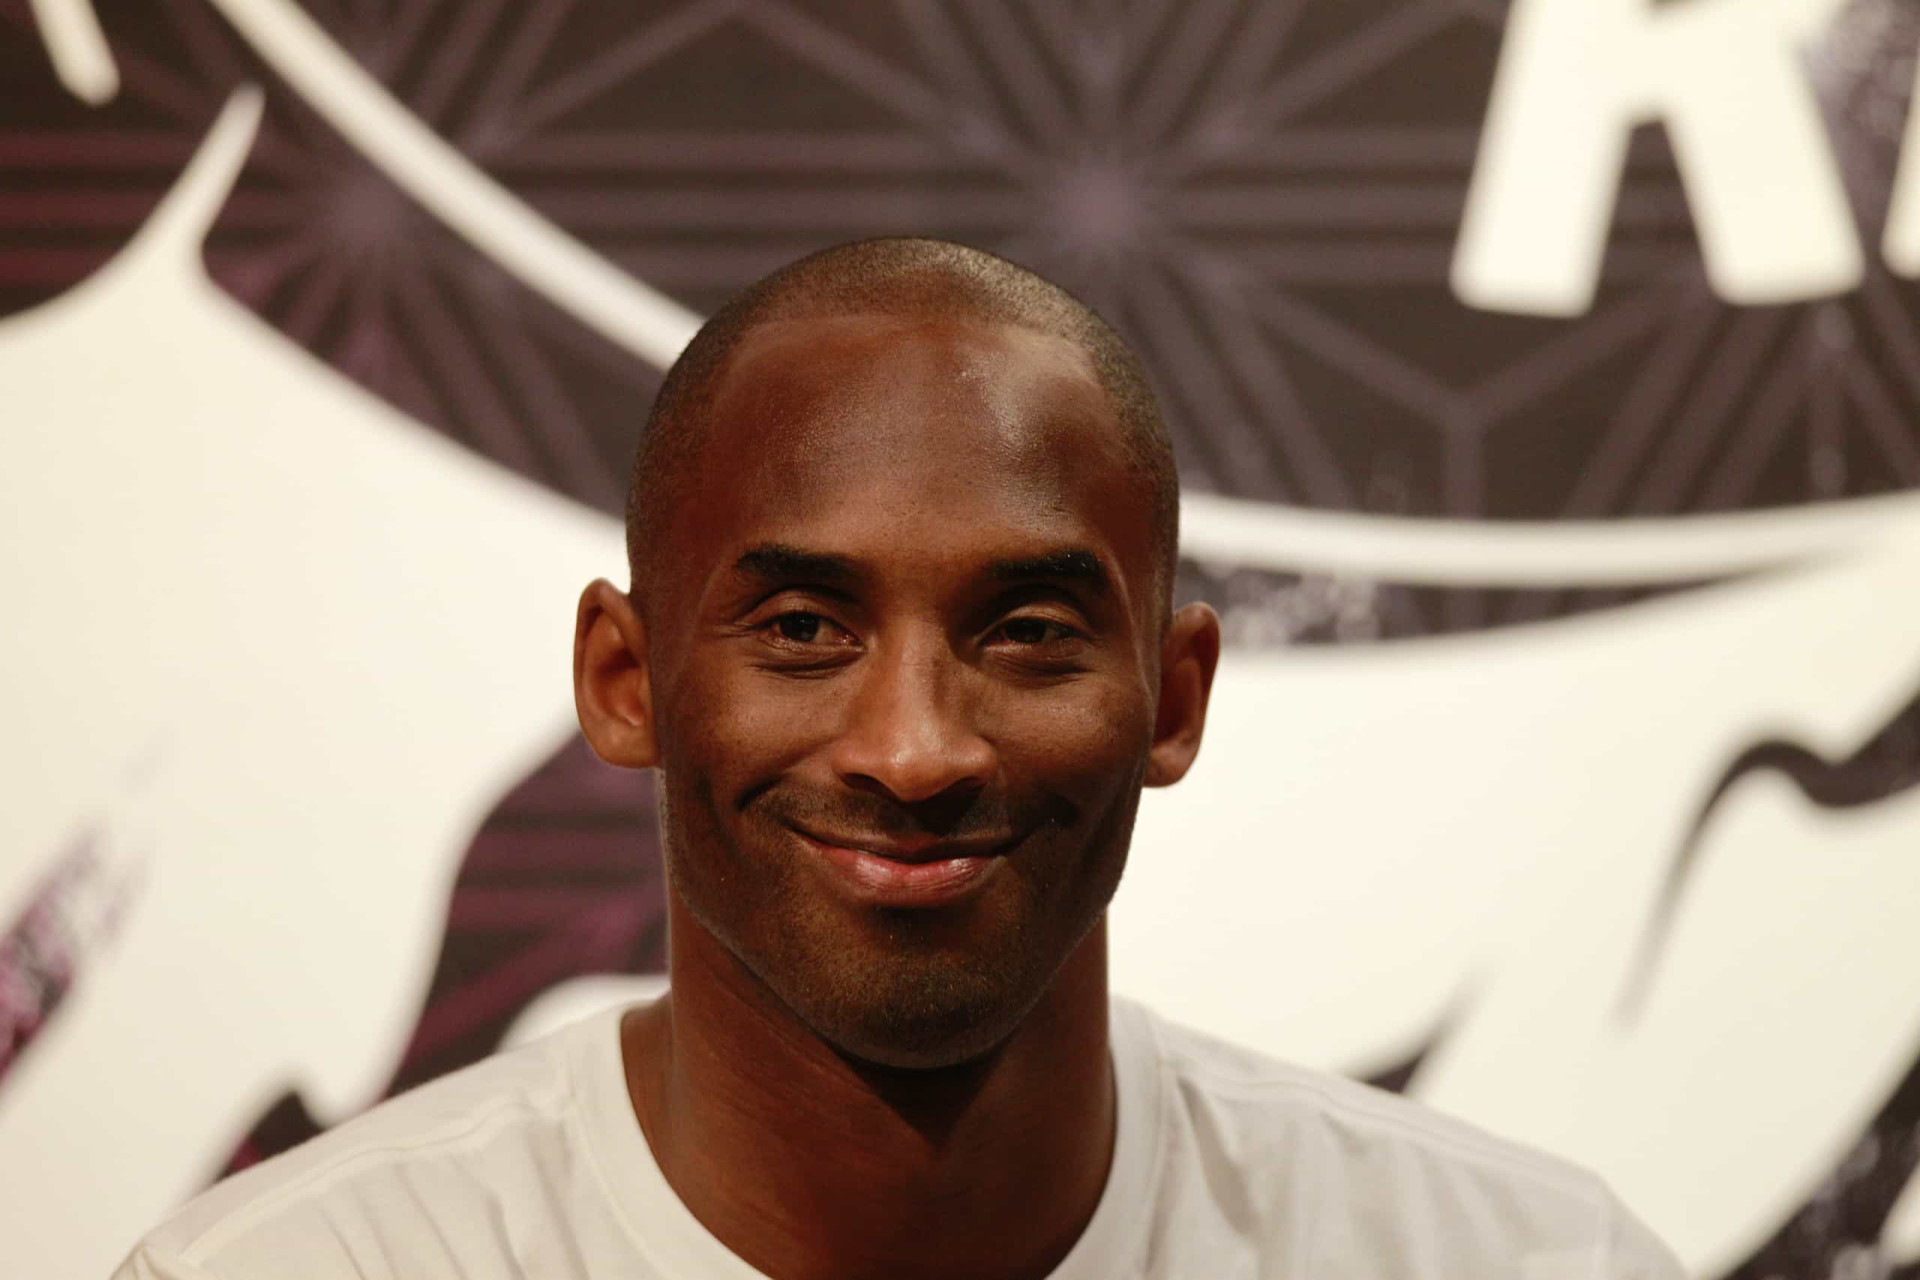 <p><span>In an article for Business Insider, James Clear wrote about how witnessing Kobe Bryant in training taught him about the importance of targeted practice.</span></p><p>You may also like:<a href="https://www.starsinsider.com/n/443234?utm_source=msn.com&utm_medium=display&utm_campaign=referral_description&utm_content=455625v3en-en"> Your favorite celebrity LGBTQ+ parents</a></p>